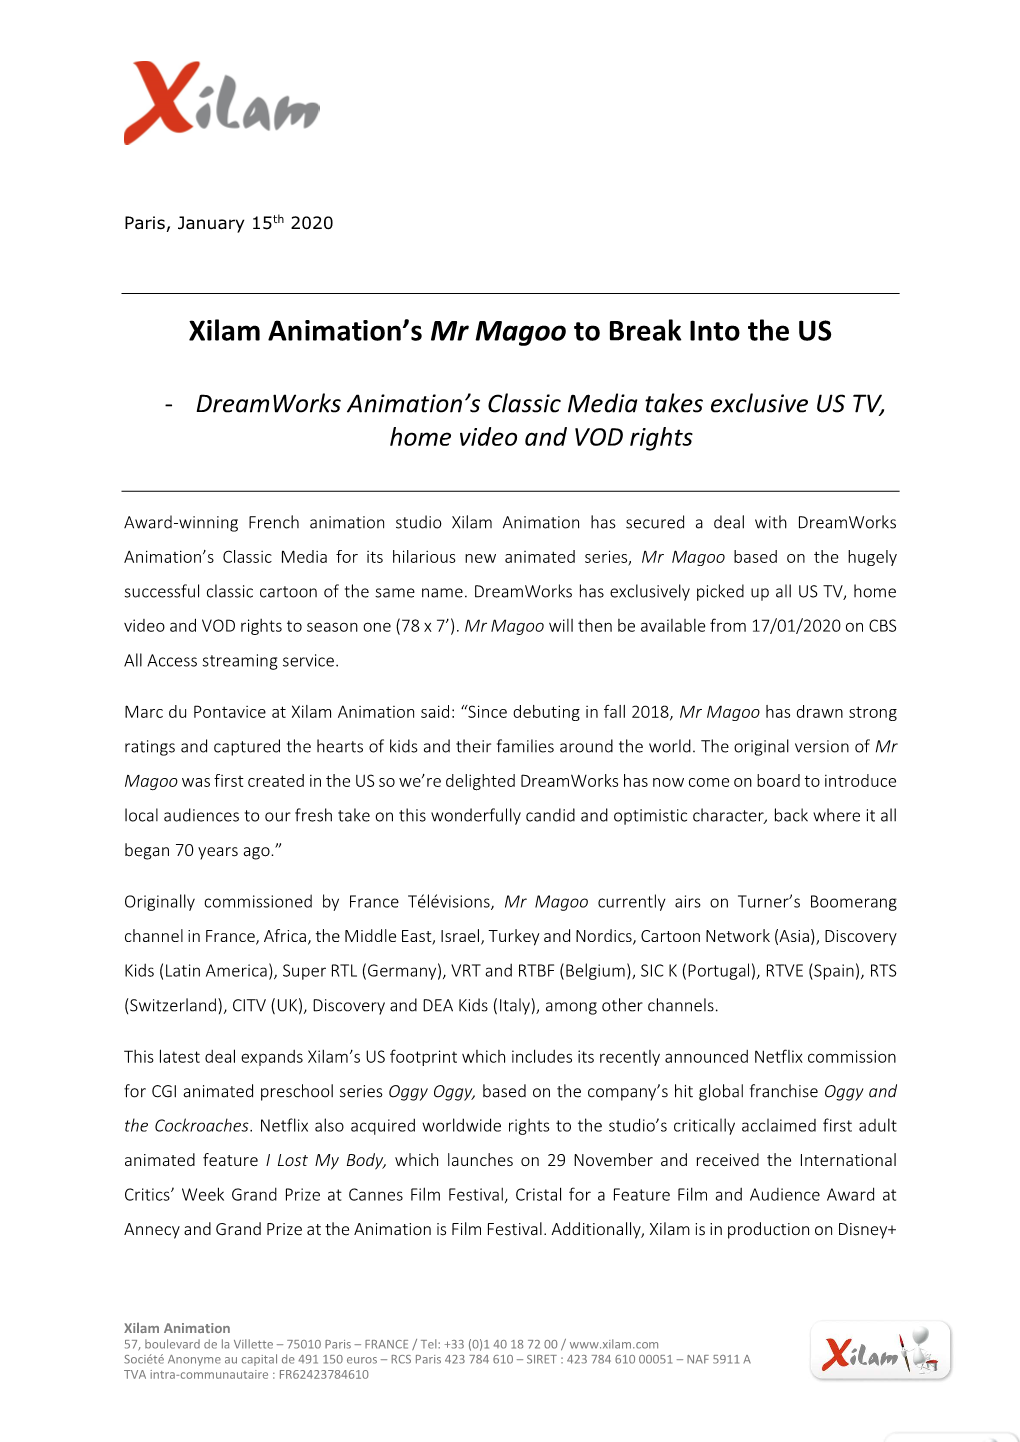 Xilam Animation's Mr Magoo to Break Into the US